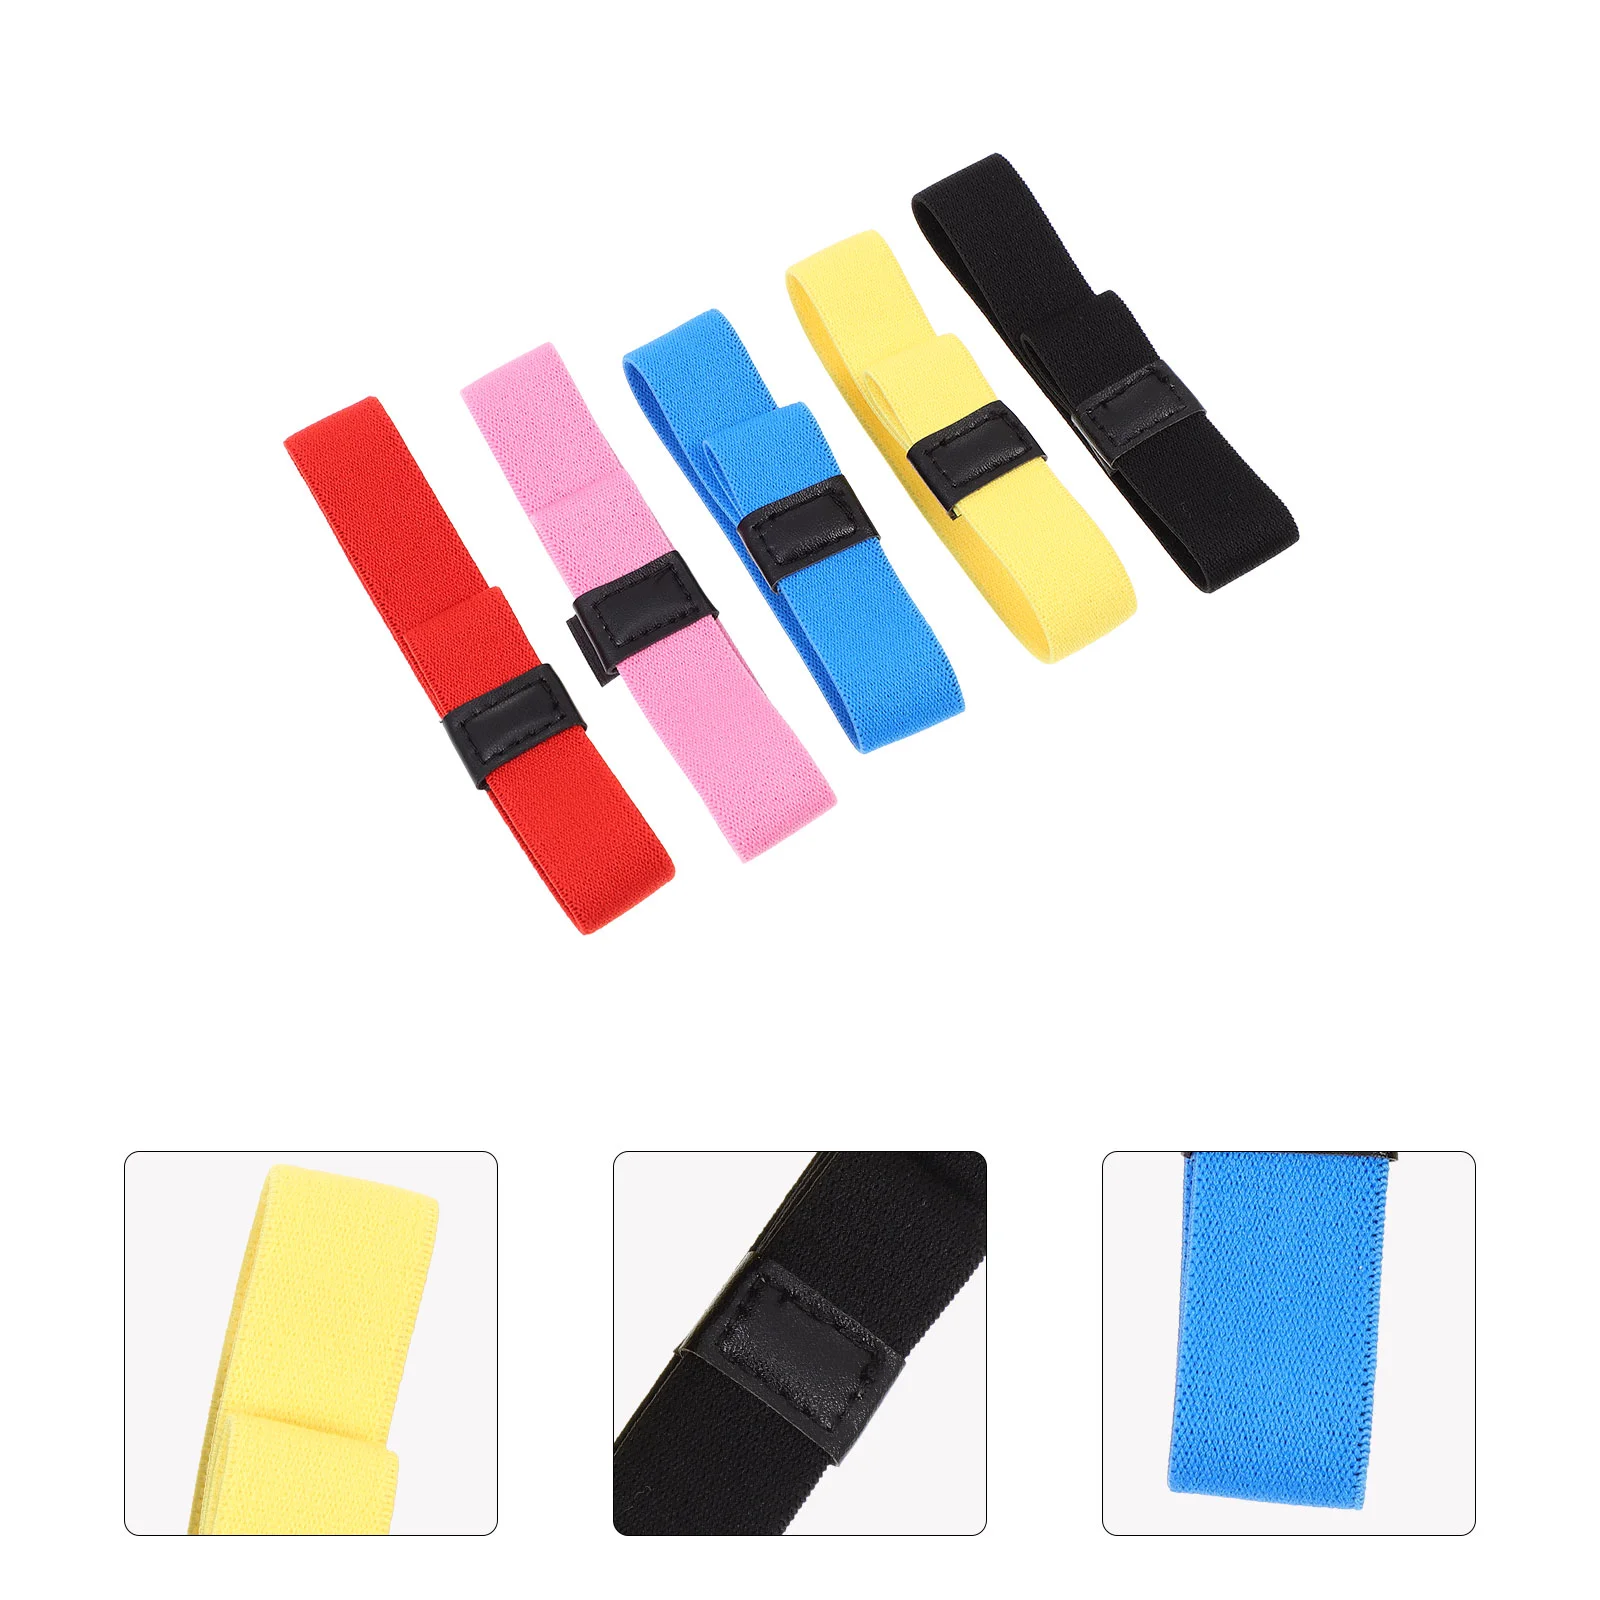 

5 Pcs Bento Box Strap Elastic Food Straps Outdoor Lunchbox Adult Containers Adults Belt Bands Silicone Elasticity School